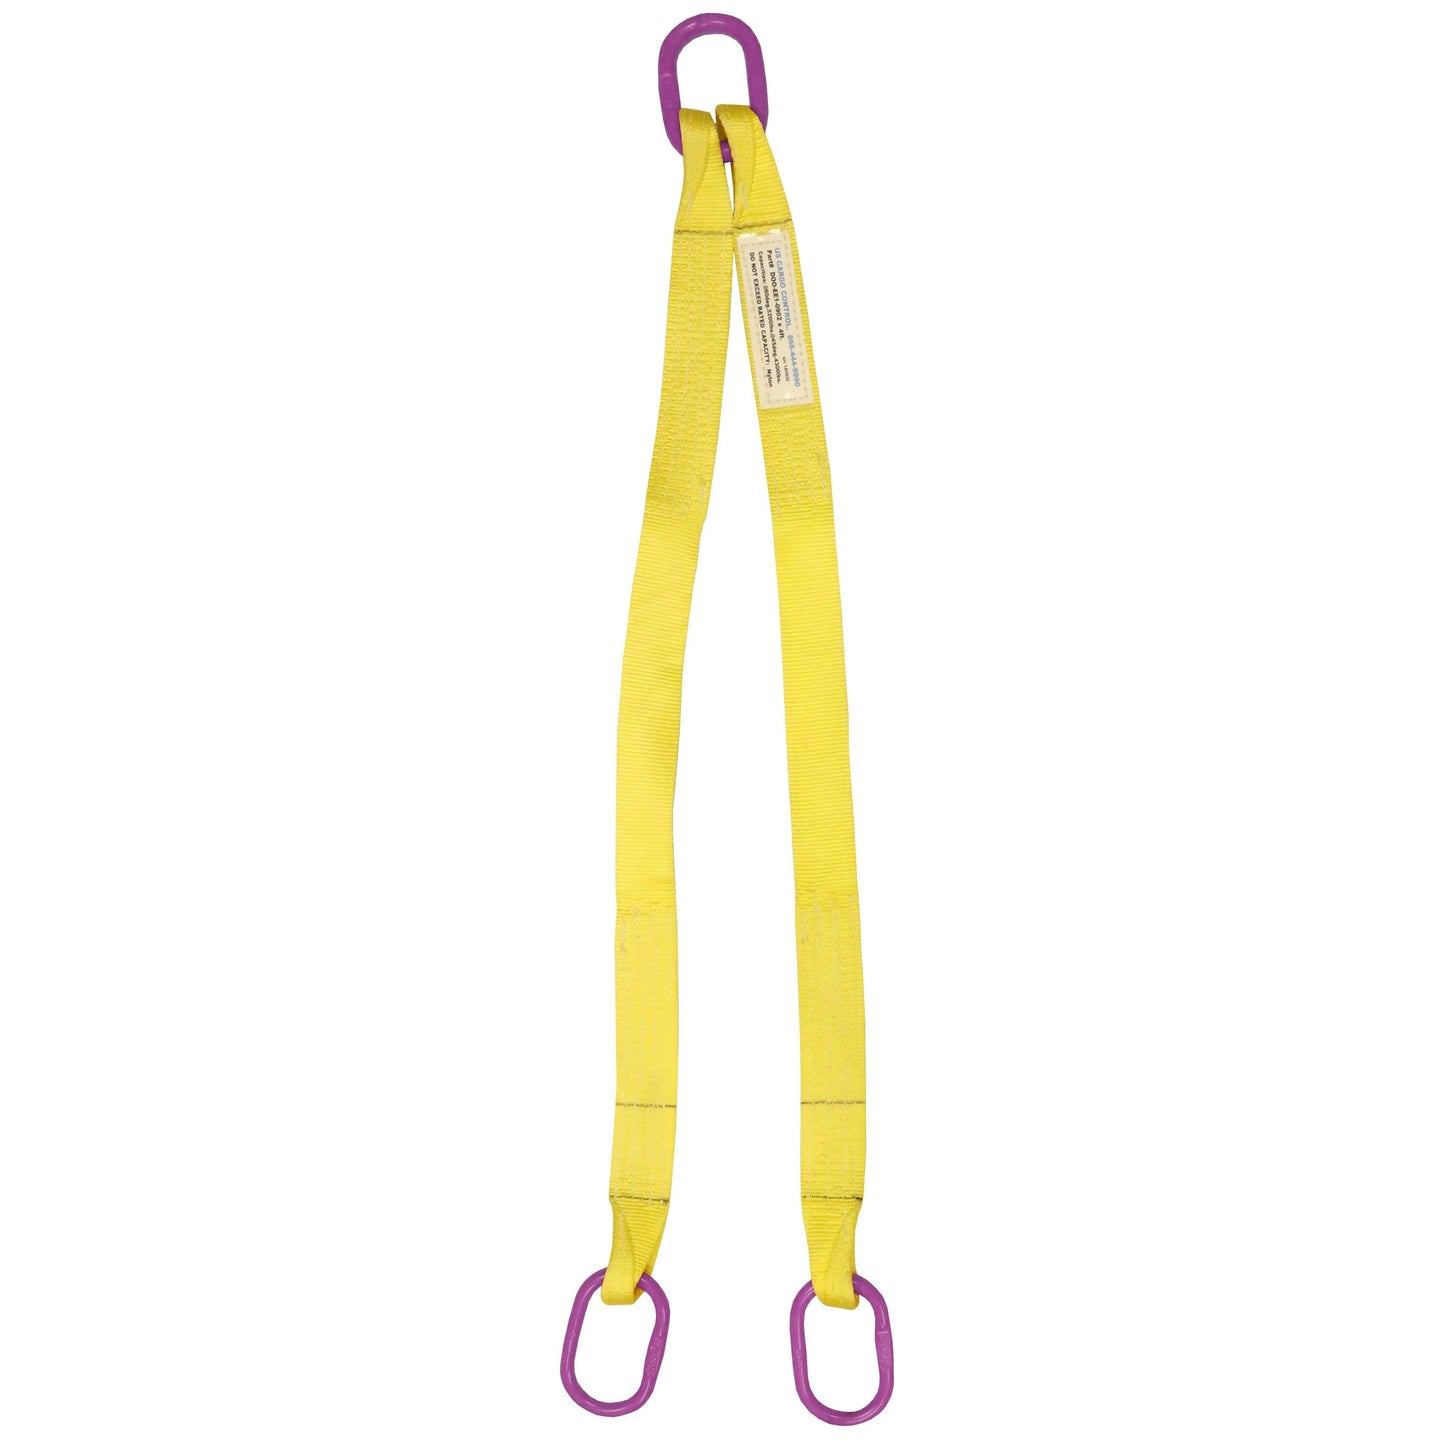 1 inchx3 foot (2 ply) Double Leg Nylon Sling w Master Link Both Ends image